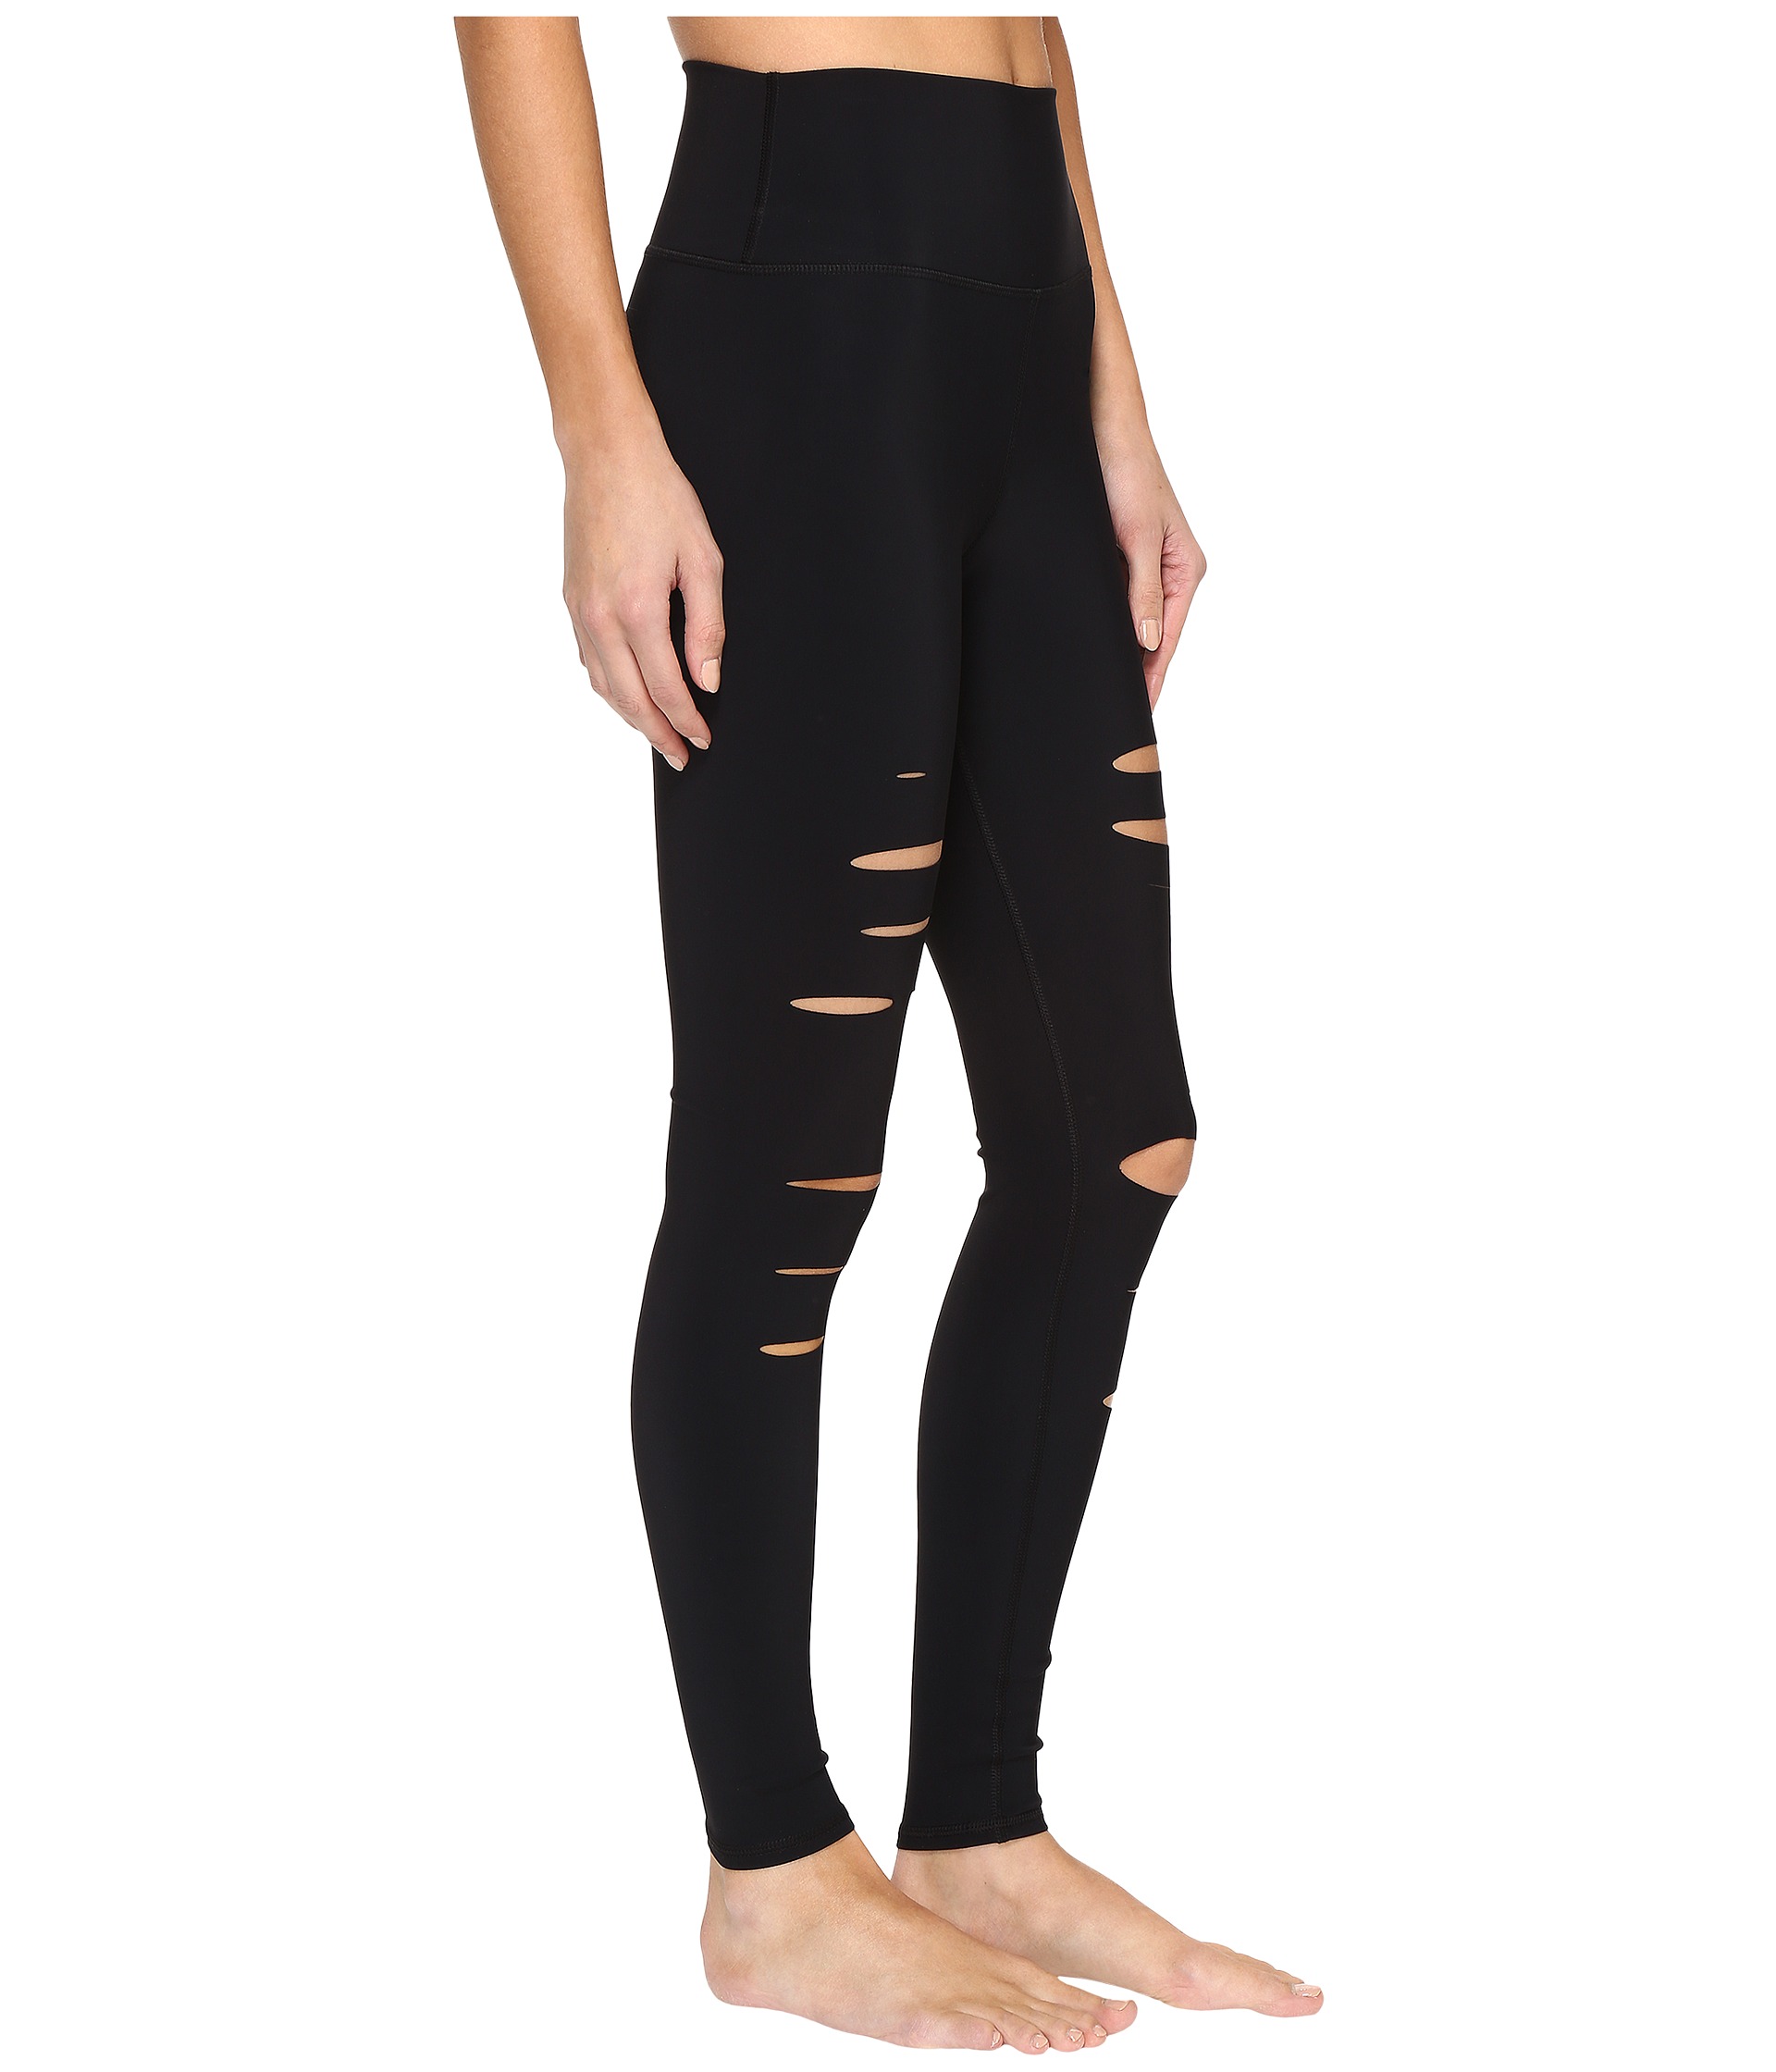 ALO Ripped Warrior Leggings at Zappos.com